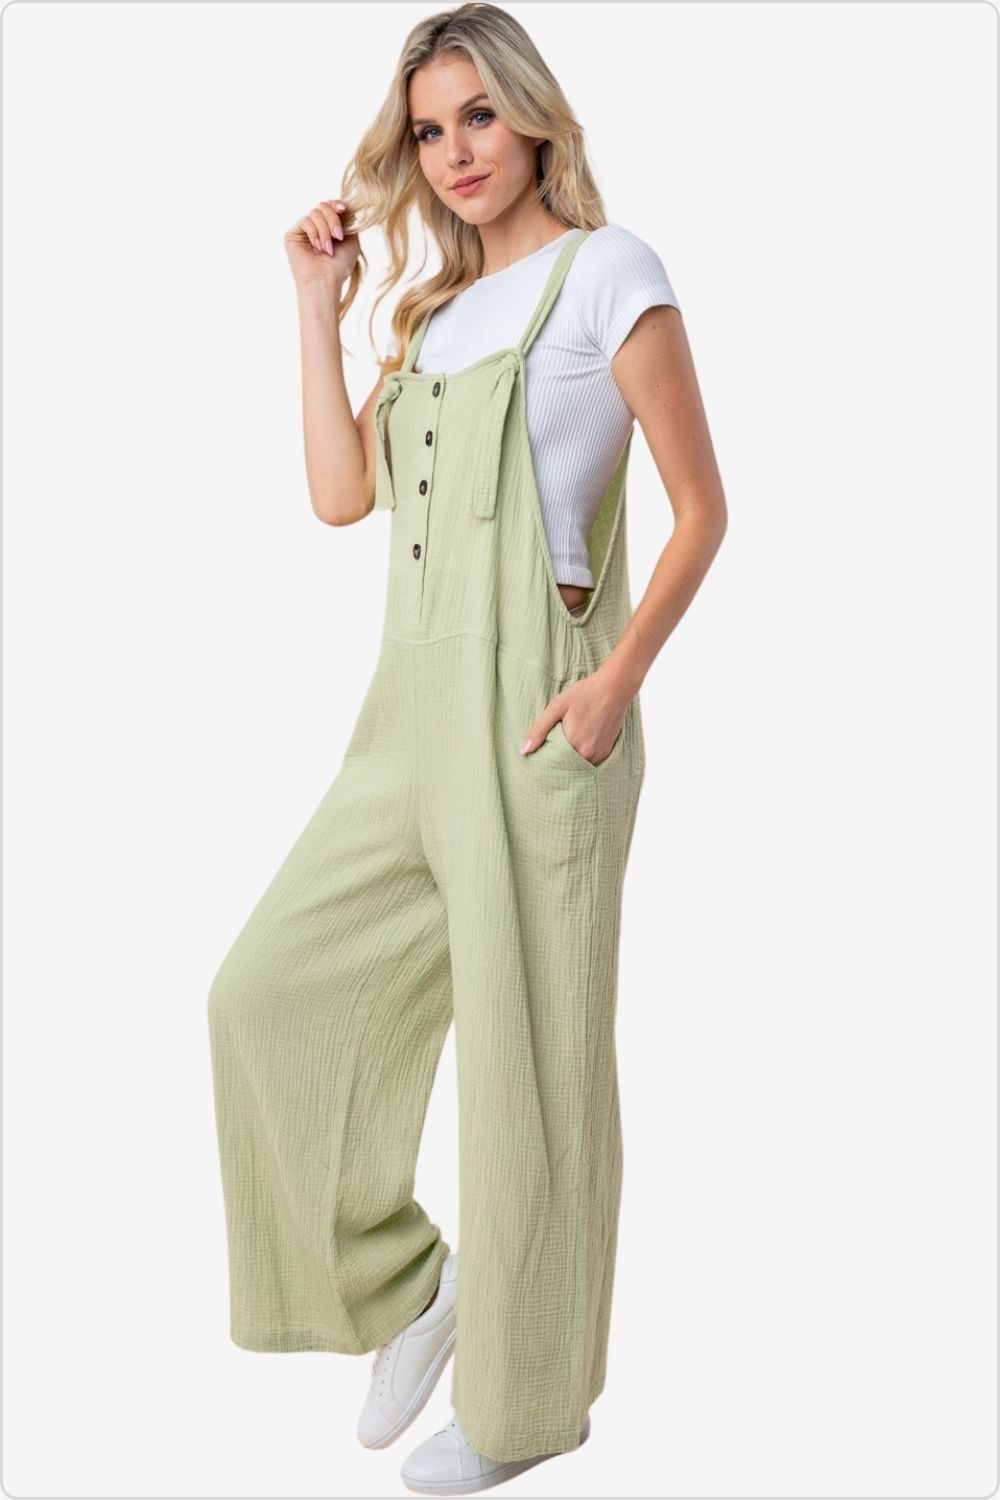 Elegant sleeveless knit jumpsuit with half-button front, perfect for a casual chic look, Color Sage